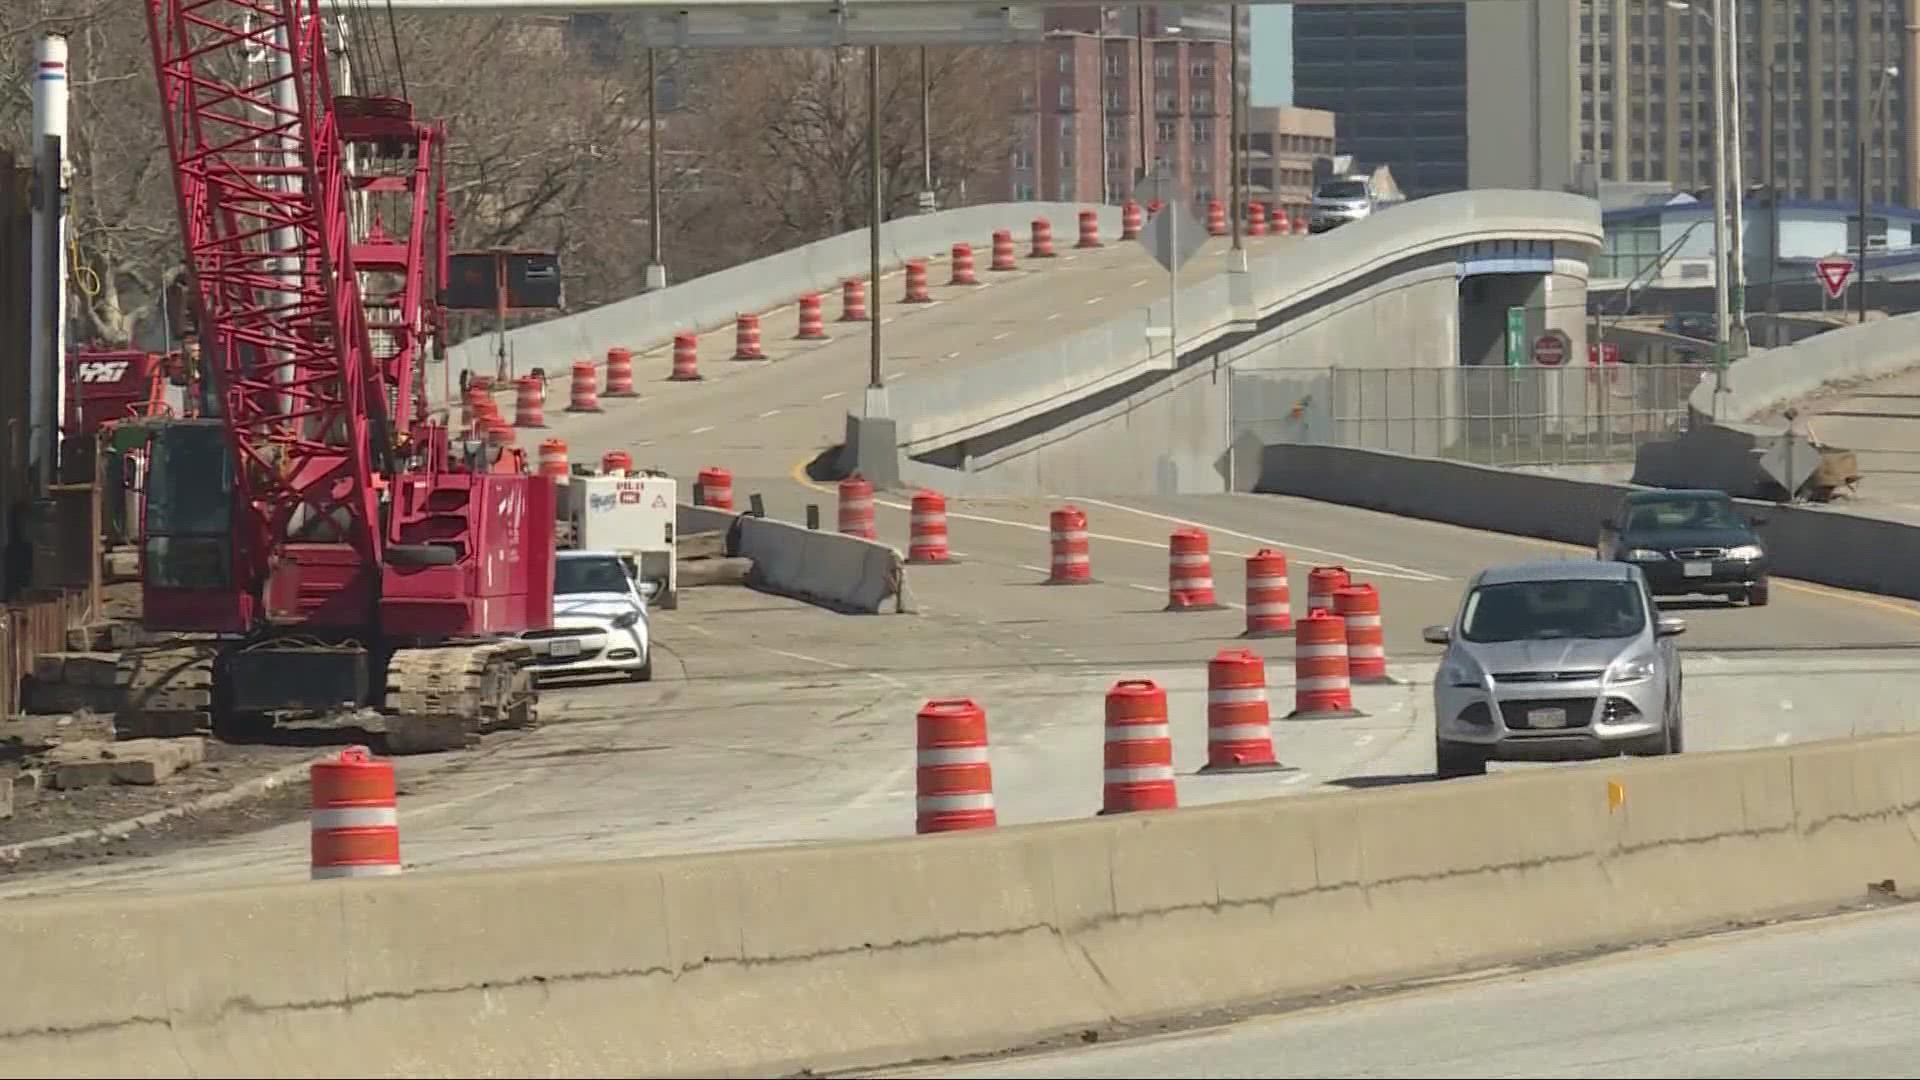 The state is spending nearly $2 billion on more than 820 construction projects this year. 222 projects will focus on road safety.